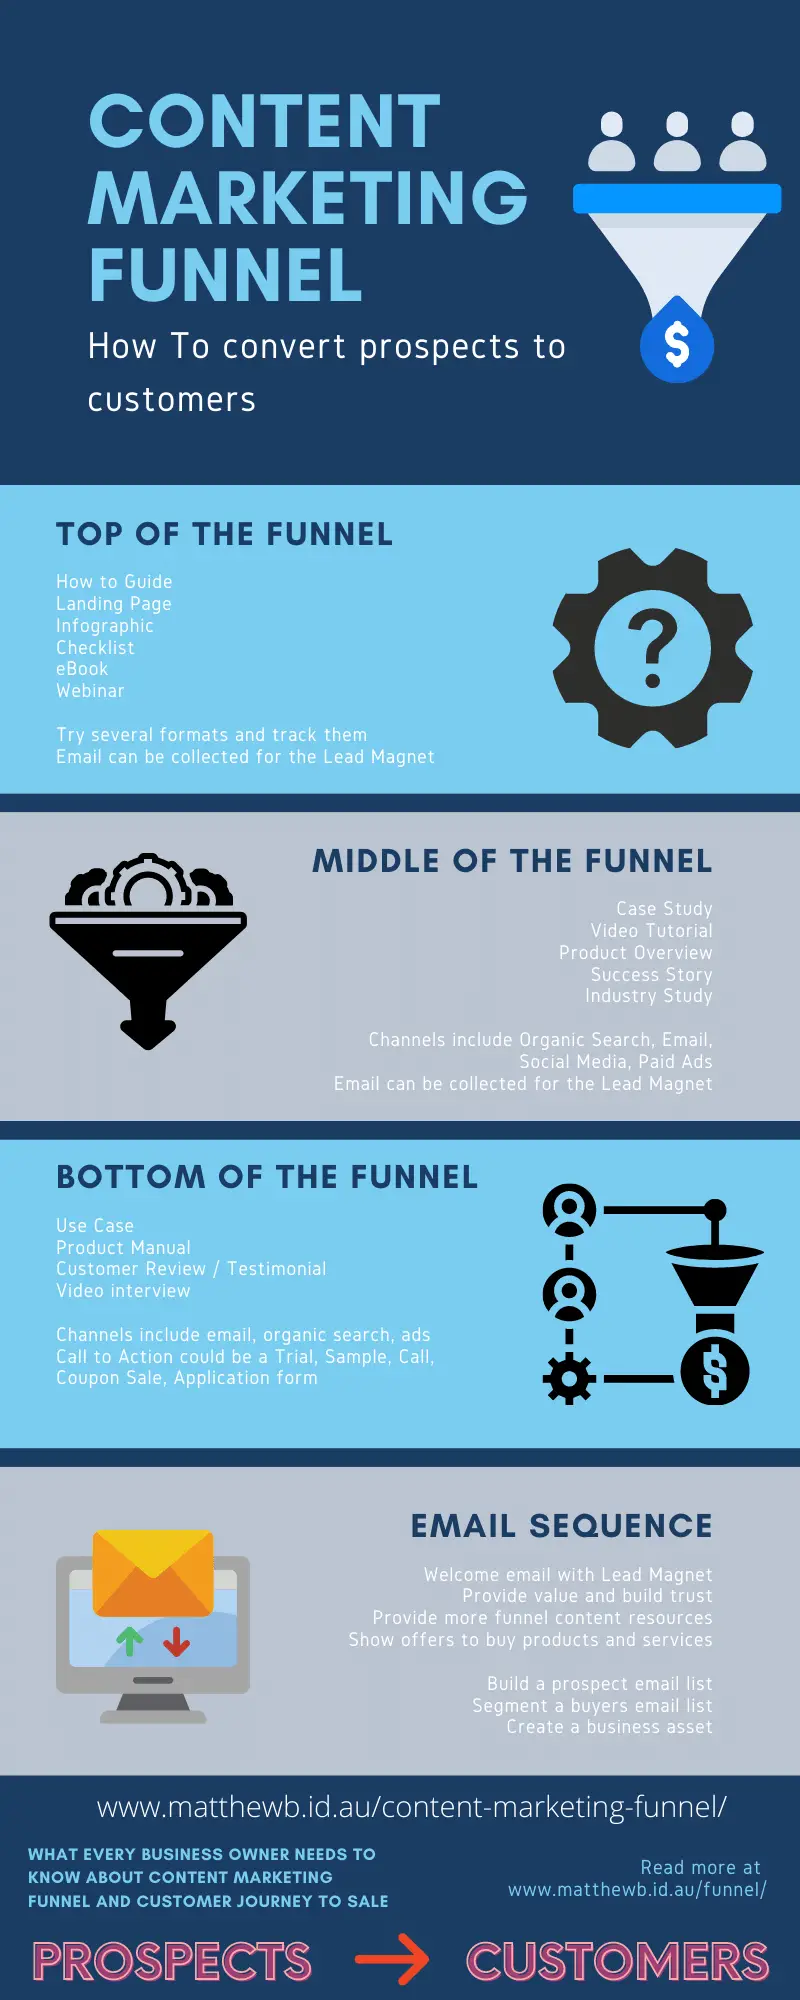 Content Marketing Funnel infographic